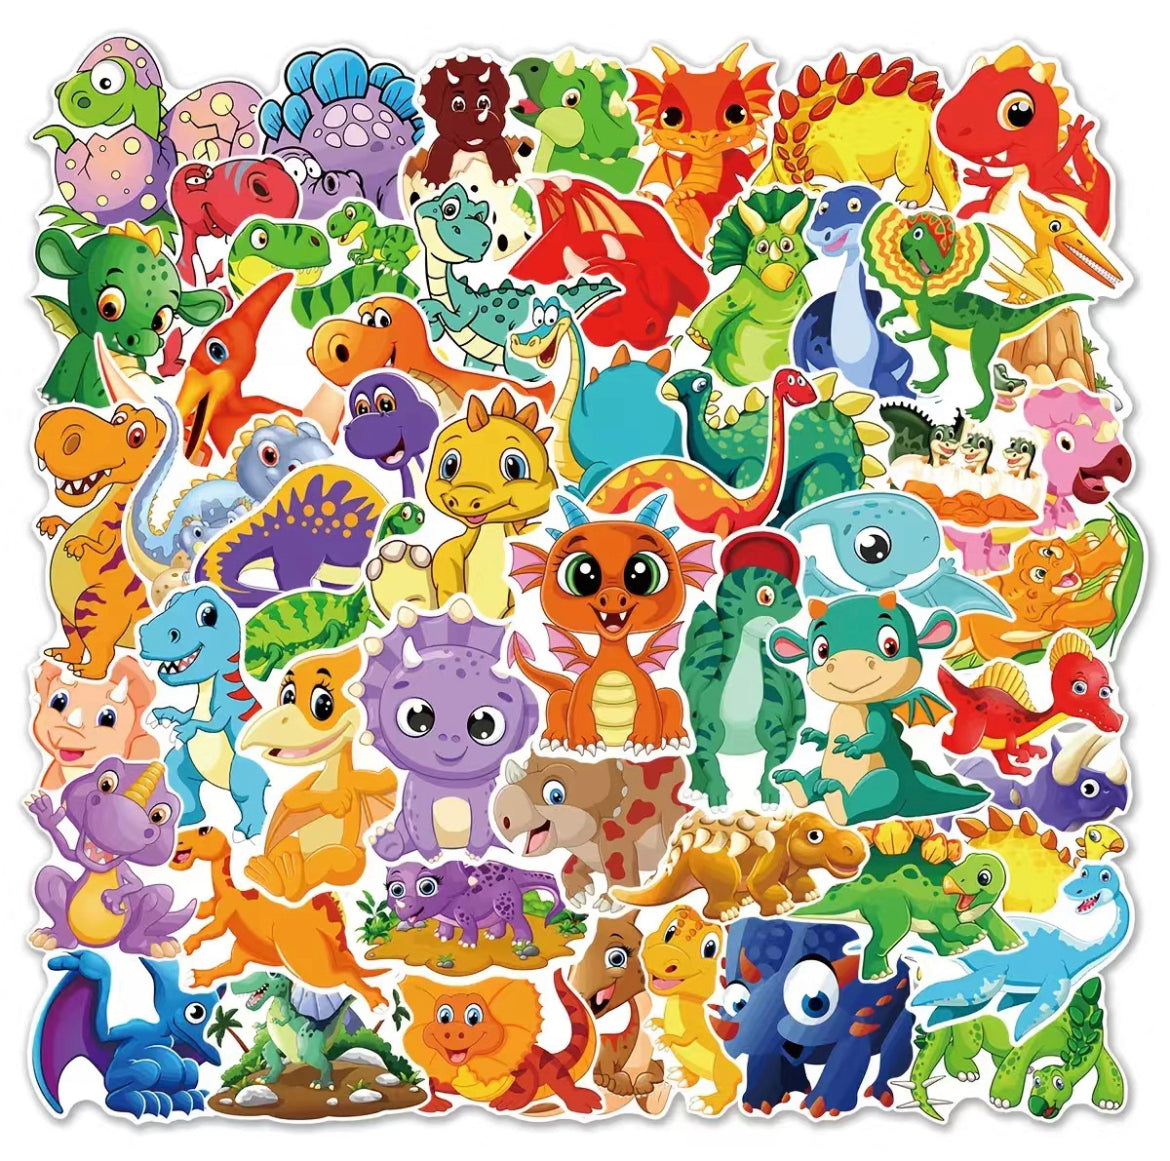 Dinosaur Sticker Pack, Stickers, Dino Stickers, Stickers for Laptops, Phone  Cases,water Bottles,blue Stickers,pink Stickers,kawaii Stickers 